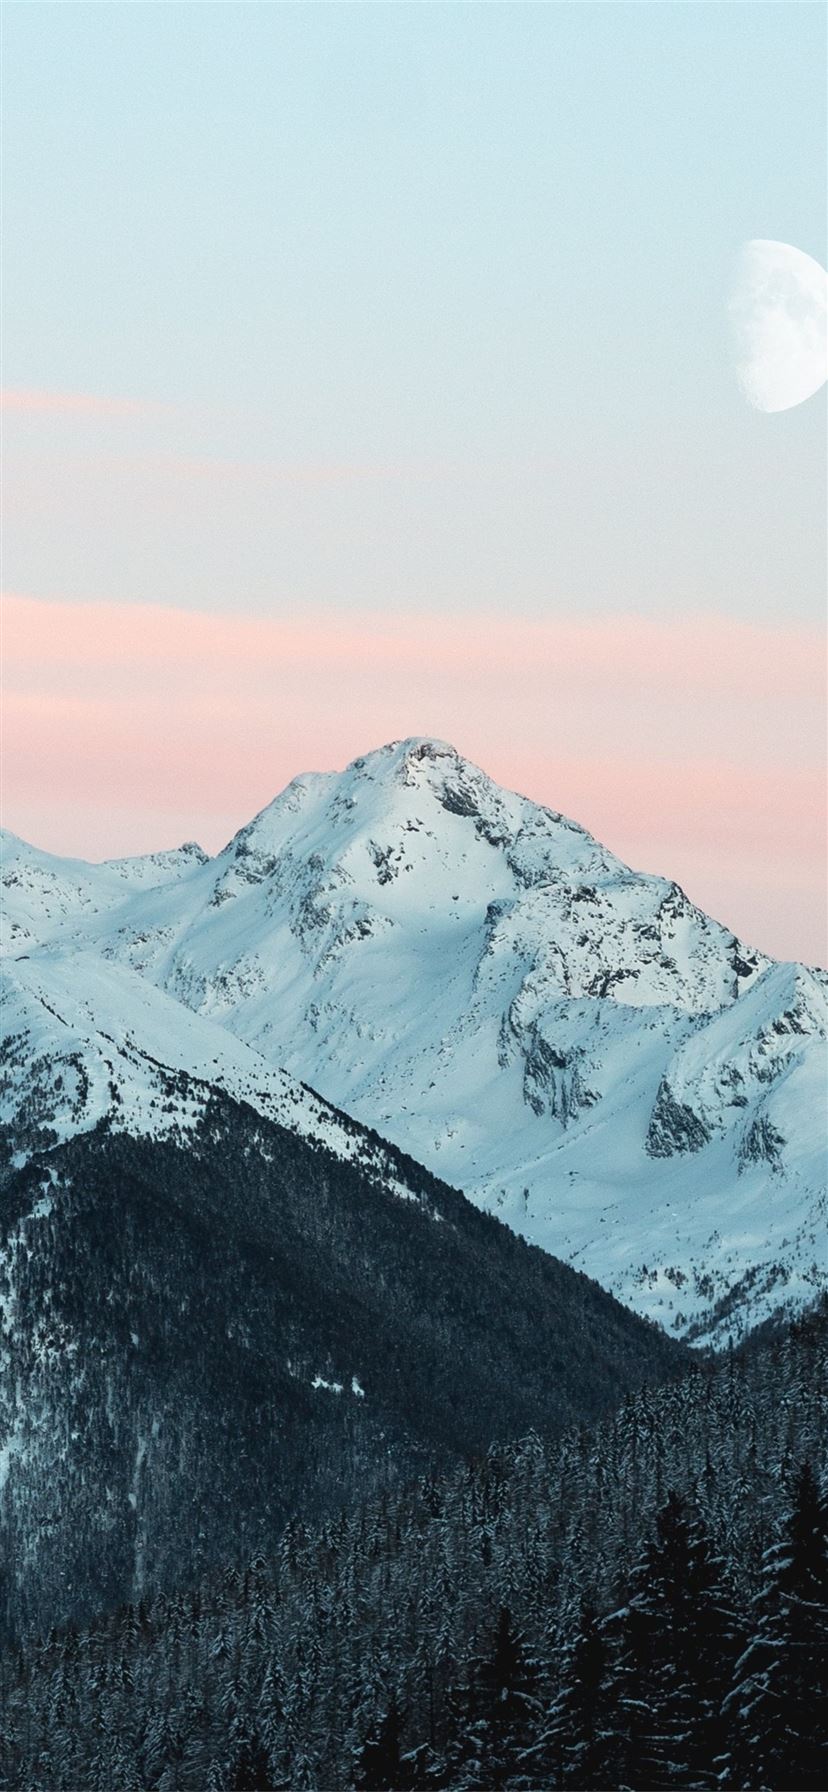 cold daylight mountains landscape 4k iPhone 11 wallpaper 